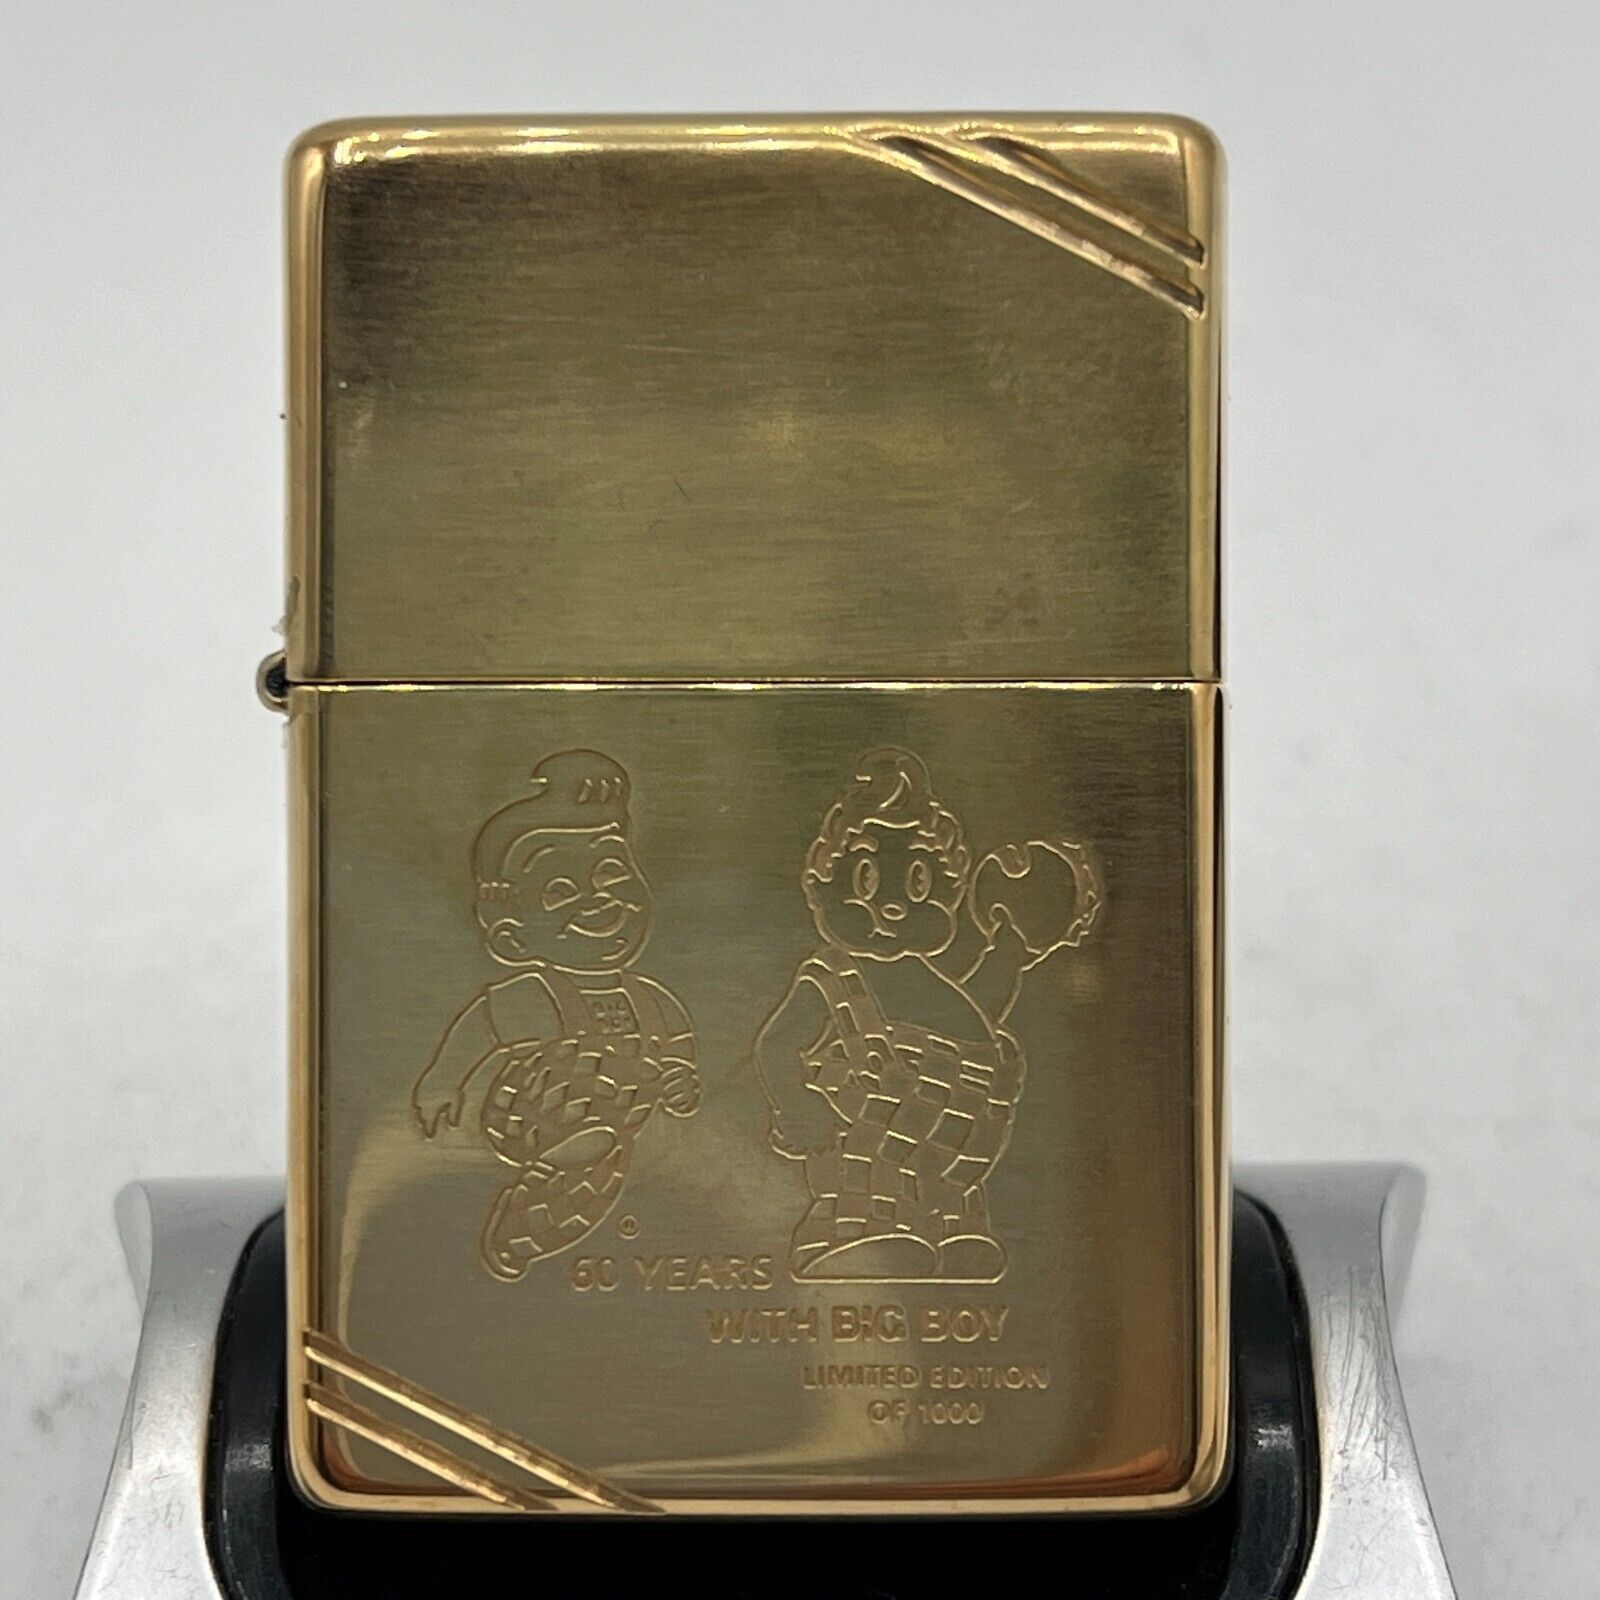 1995 ZIPPO BRASS BIG BOY 60 YEARS LIMITED EDITION OF 1000 RARE NOS